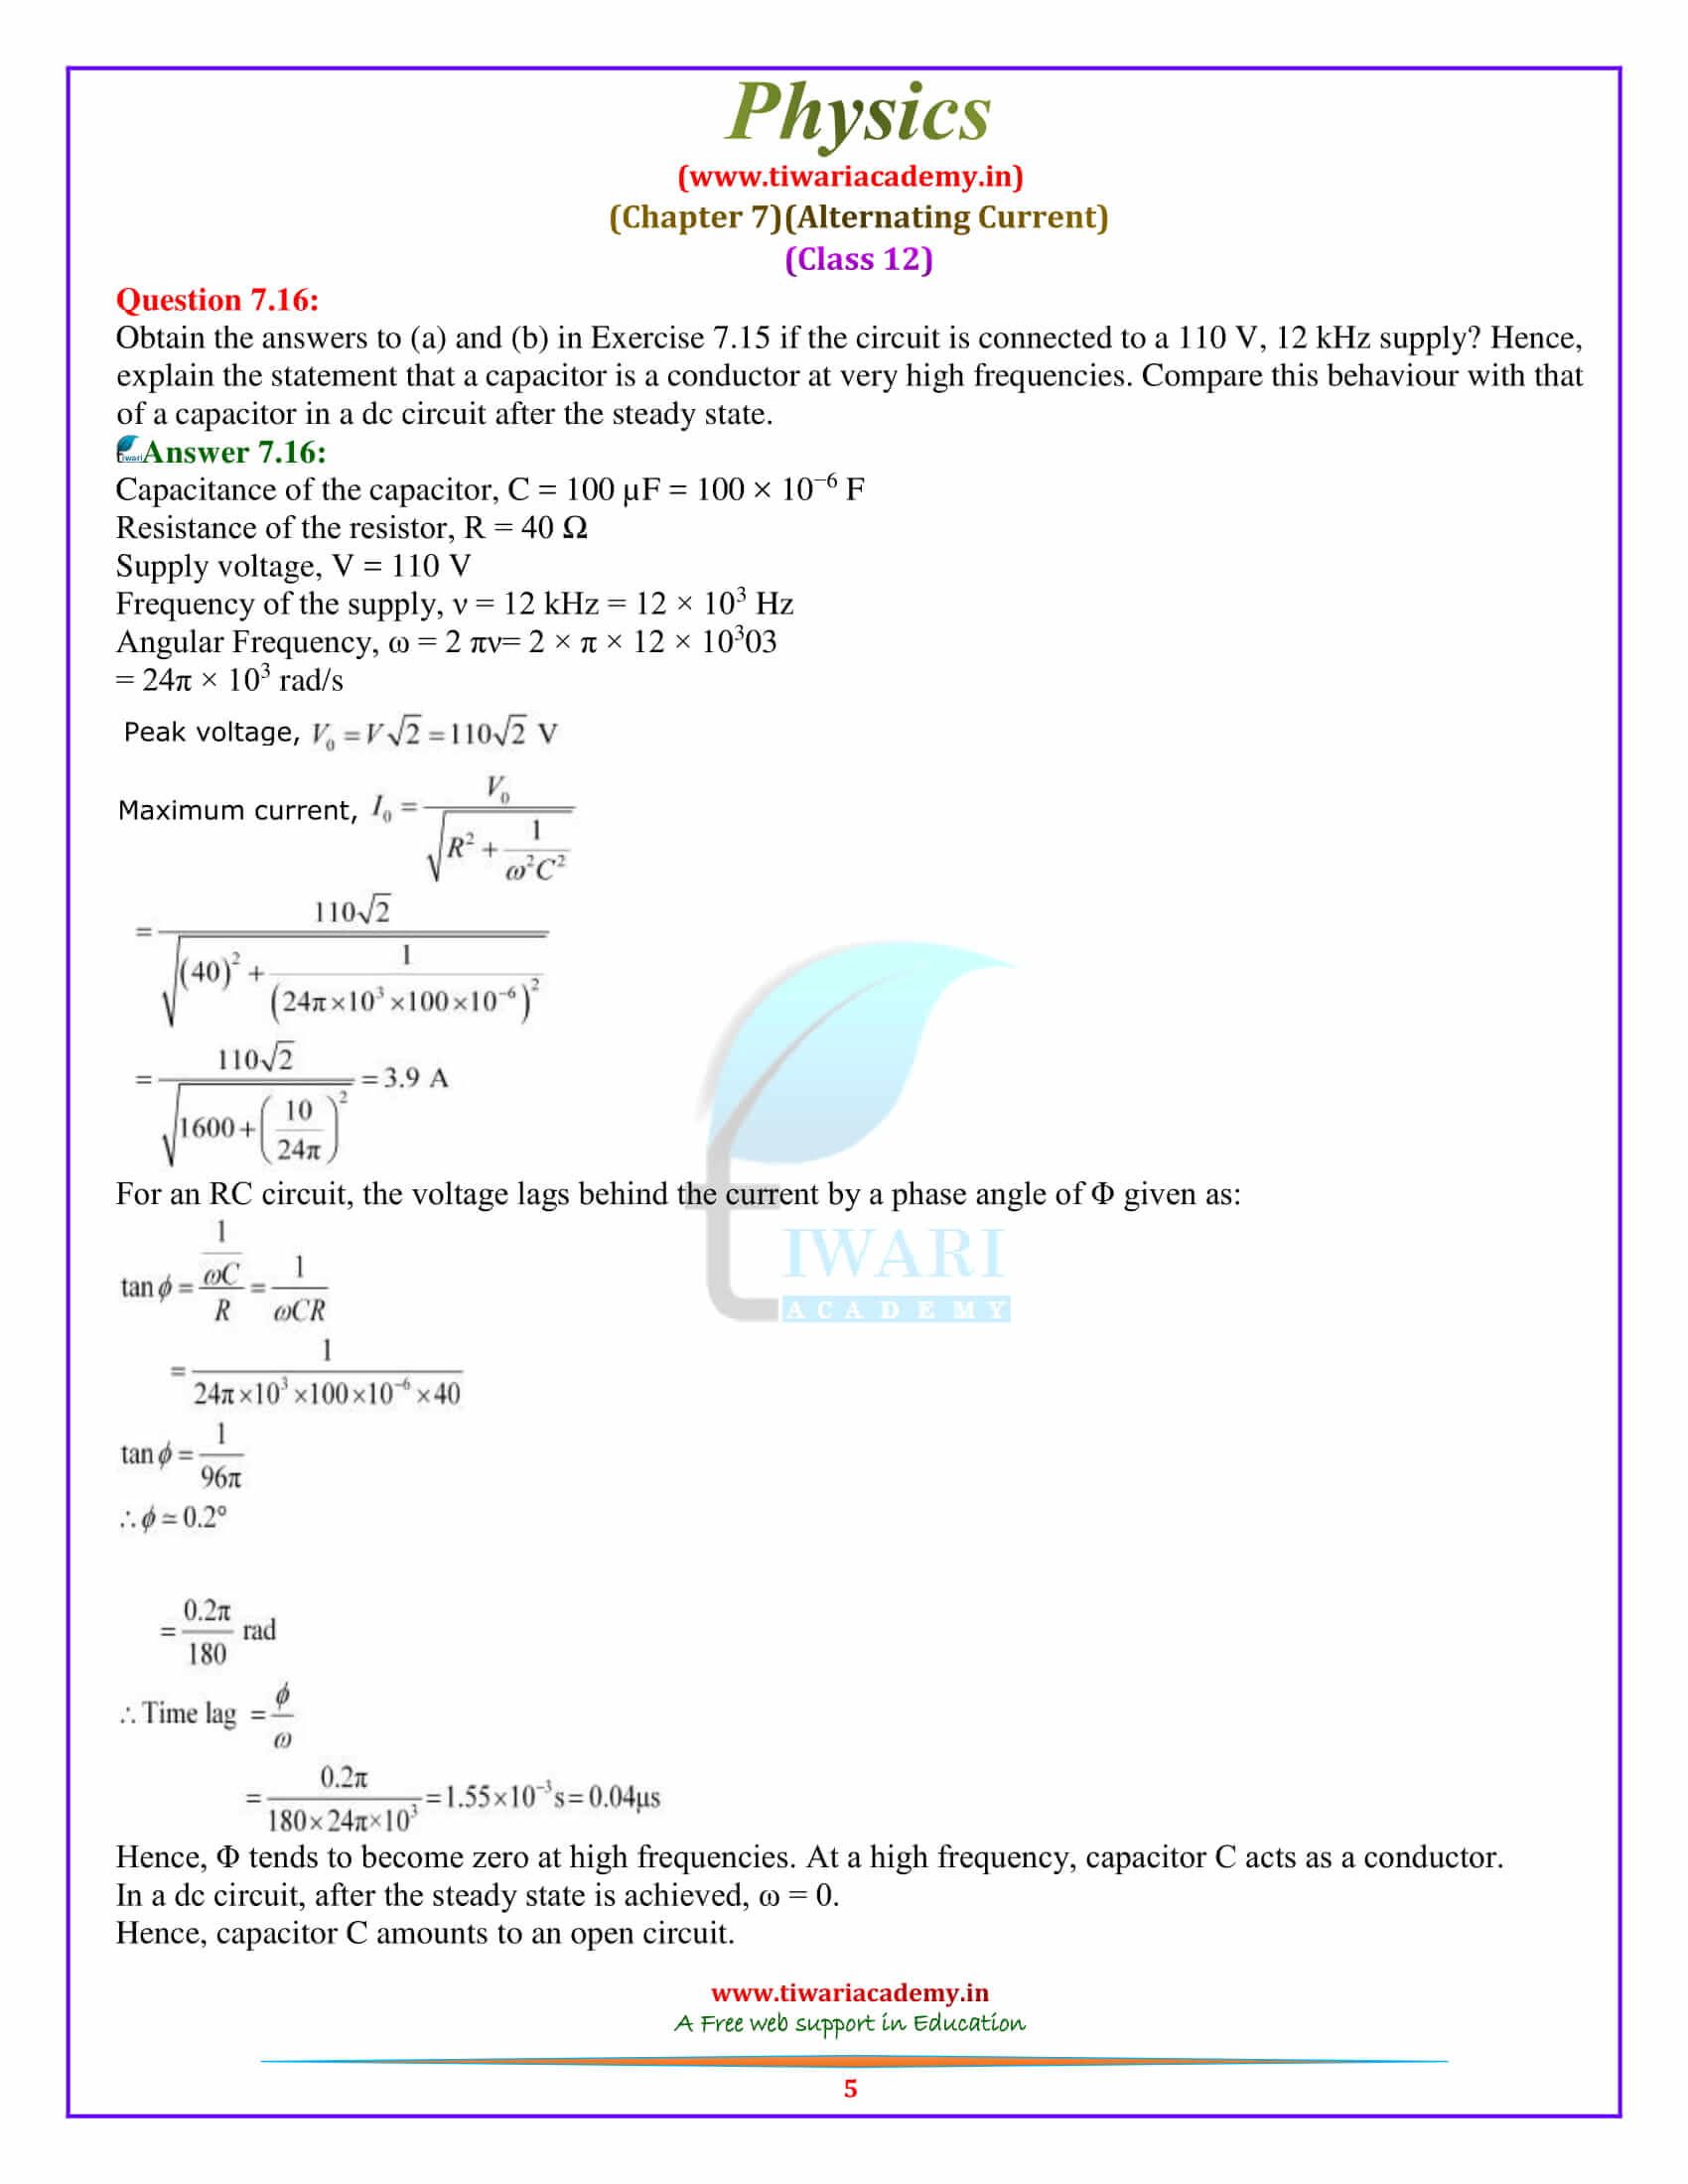 12 Physics Chapter 7 Alternating Current additional exercises in english medium